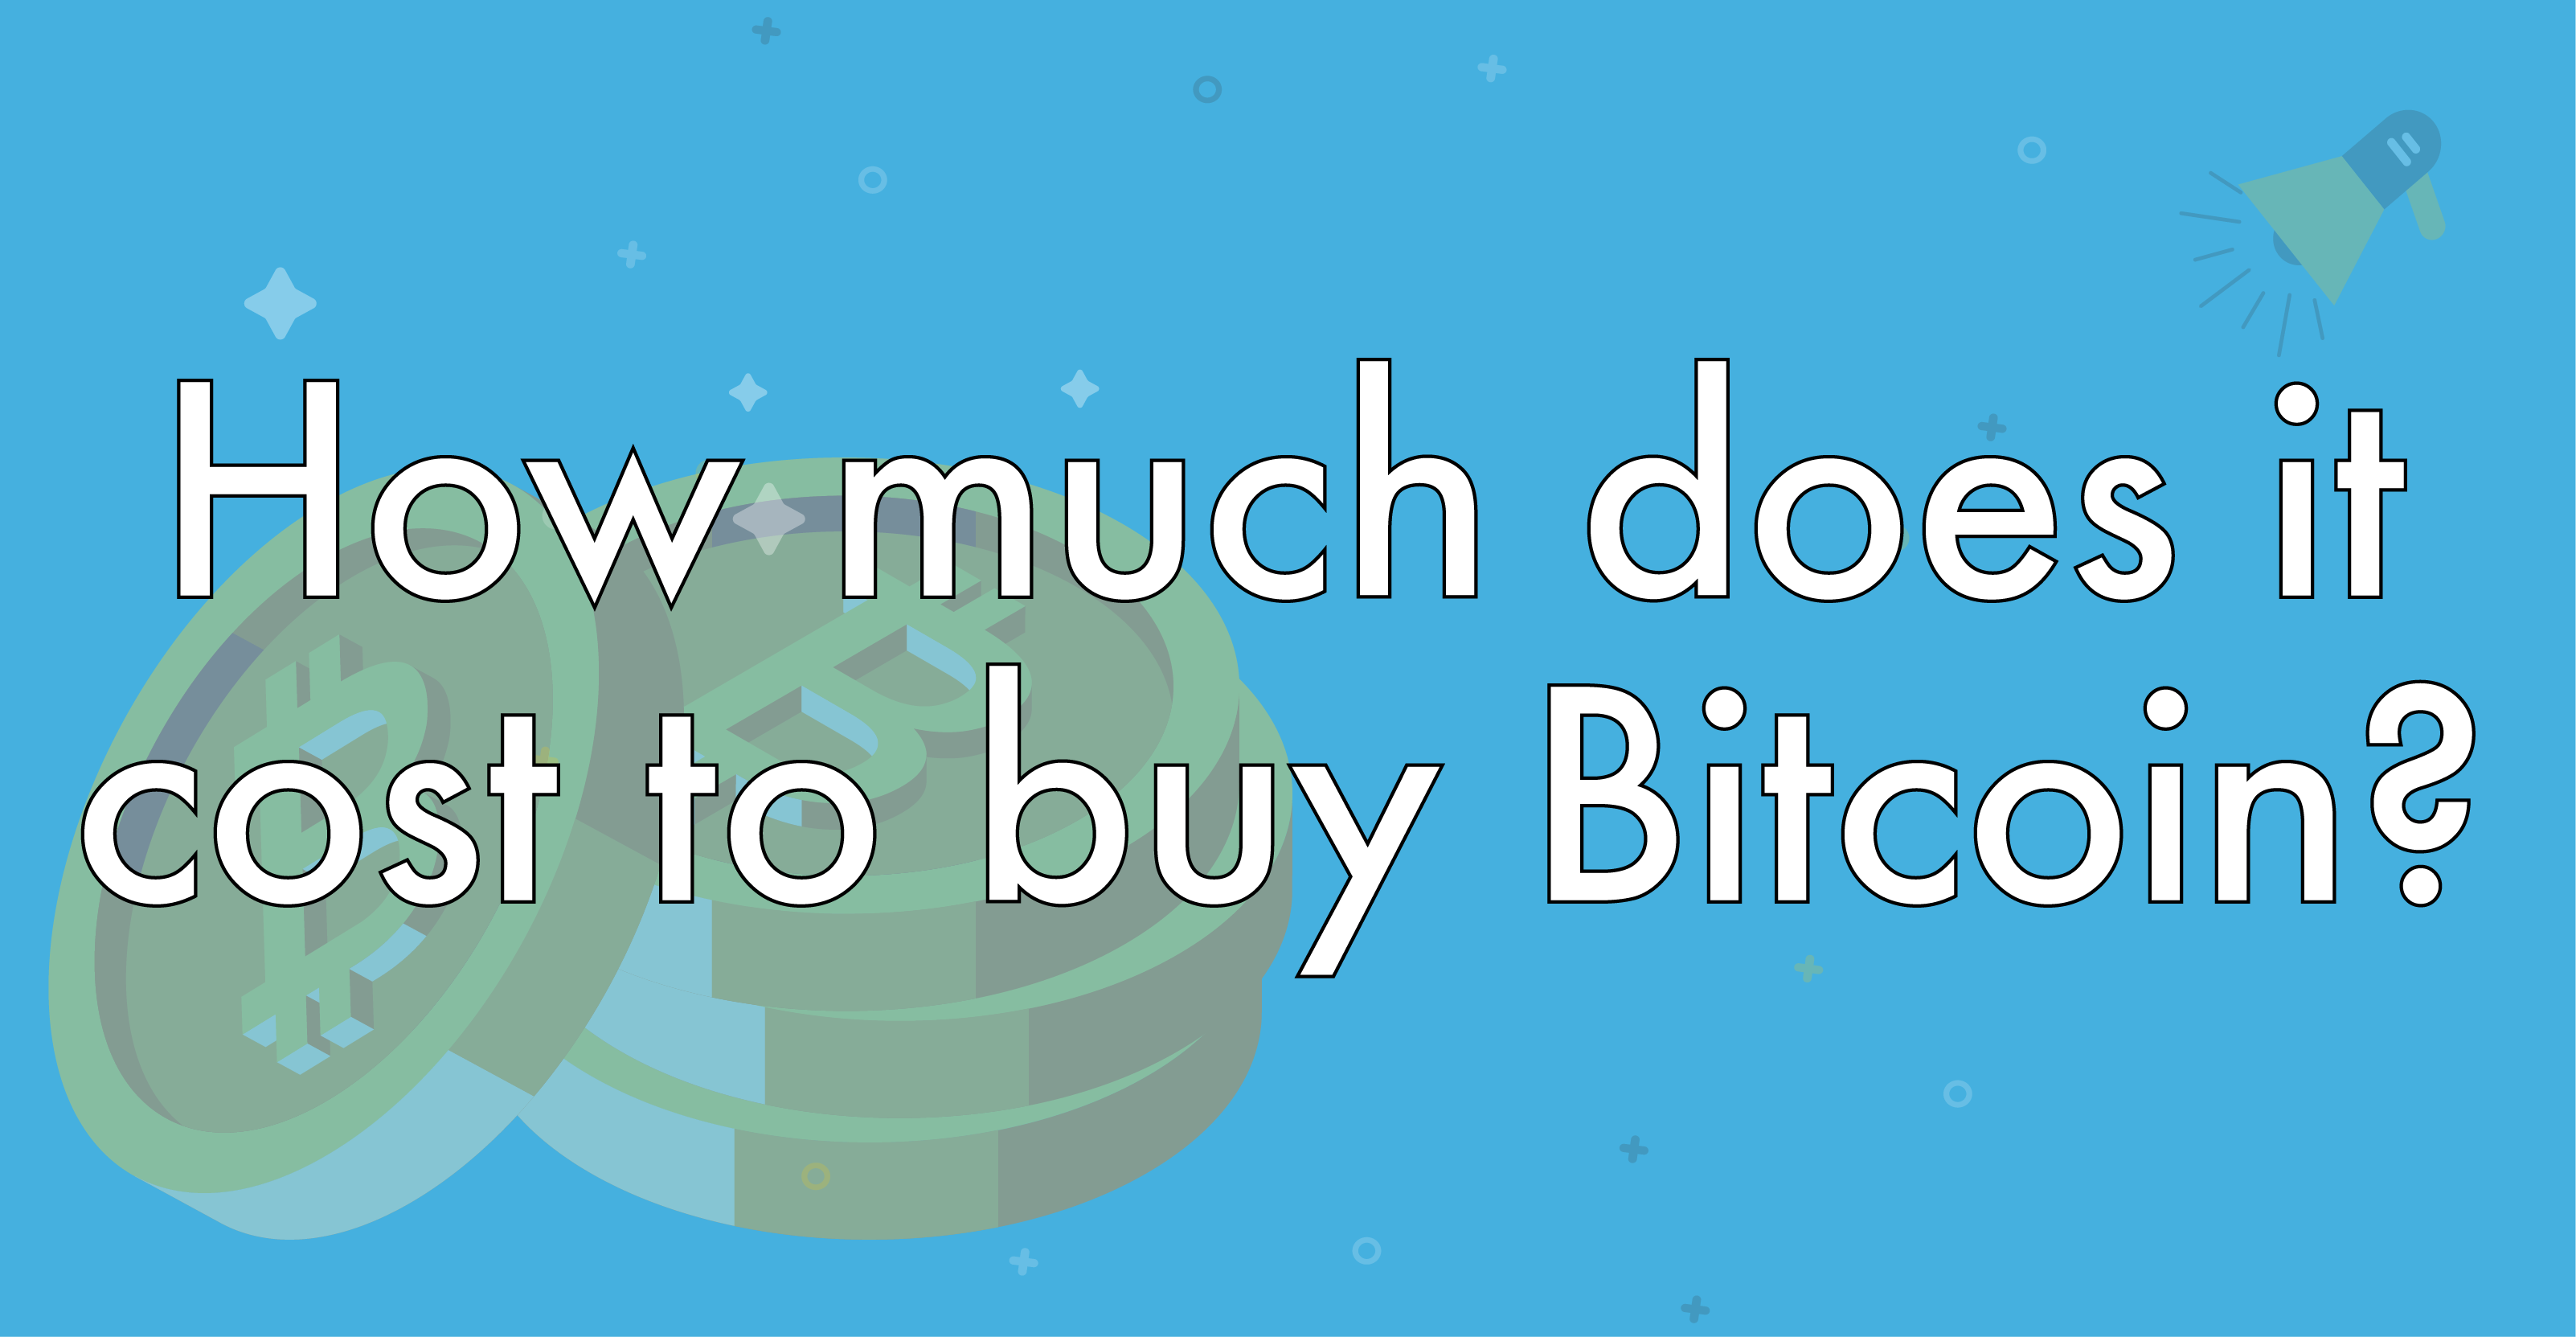 how much would it cost me to buy one bitcoin